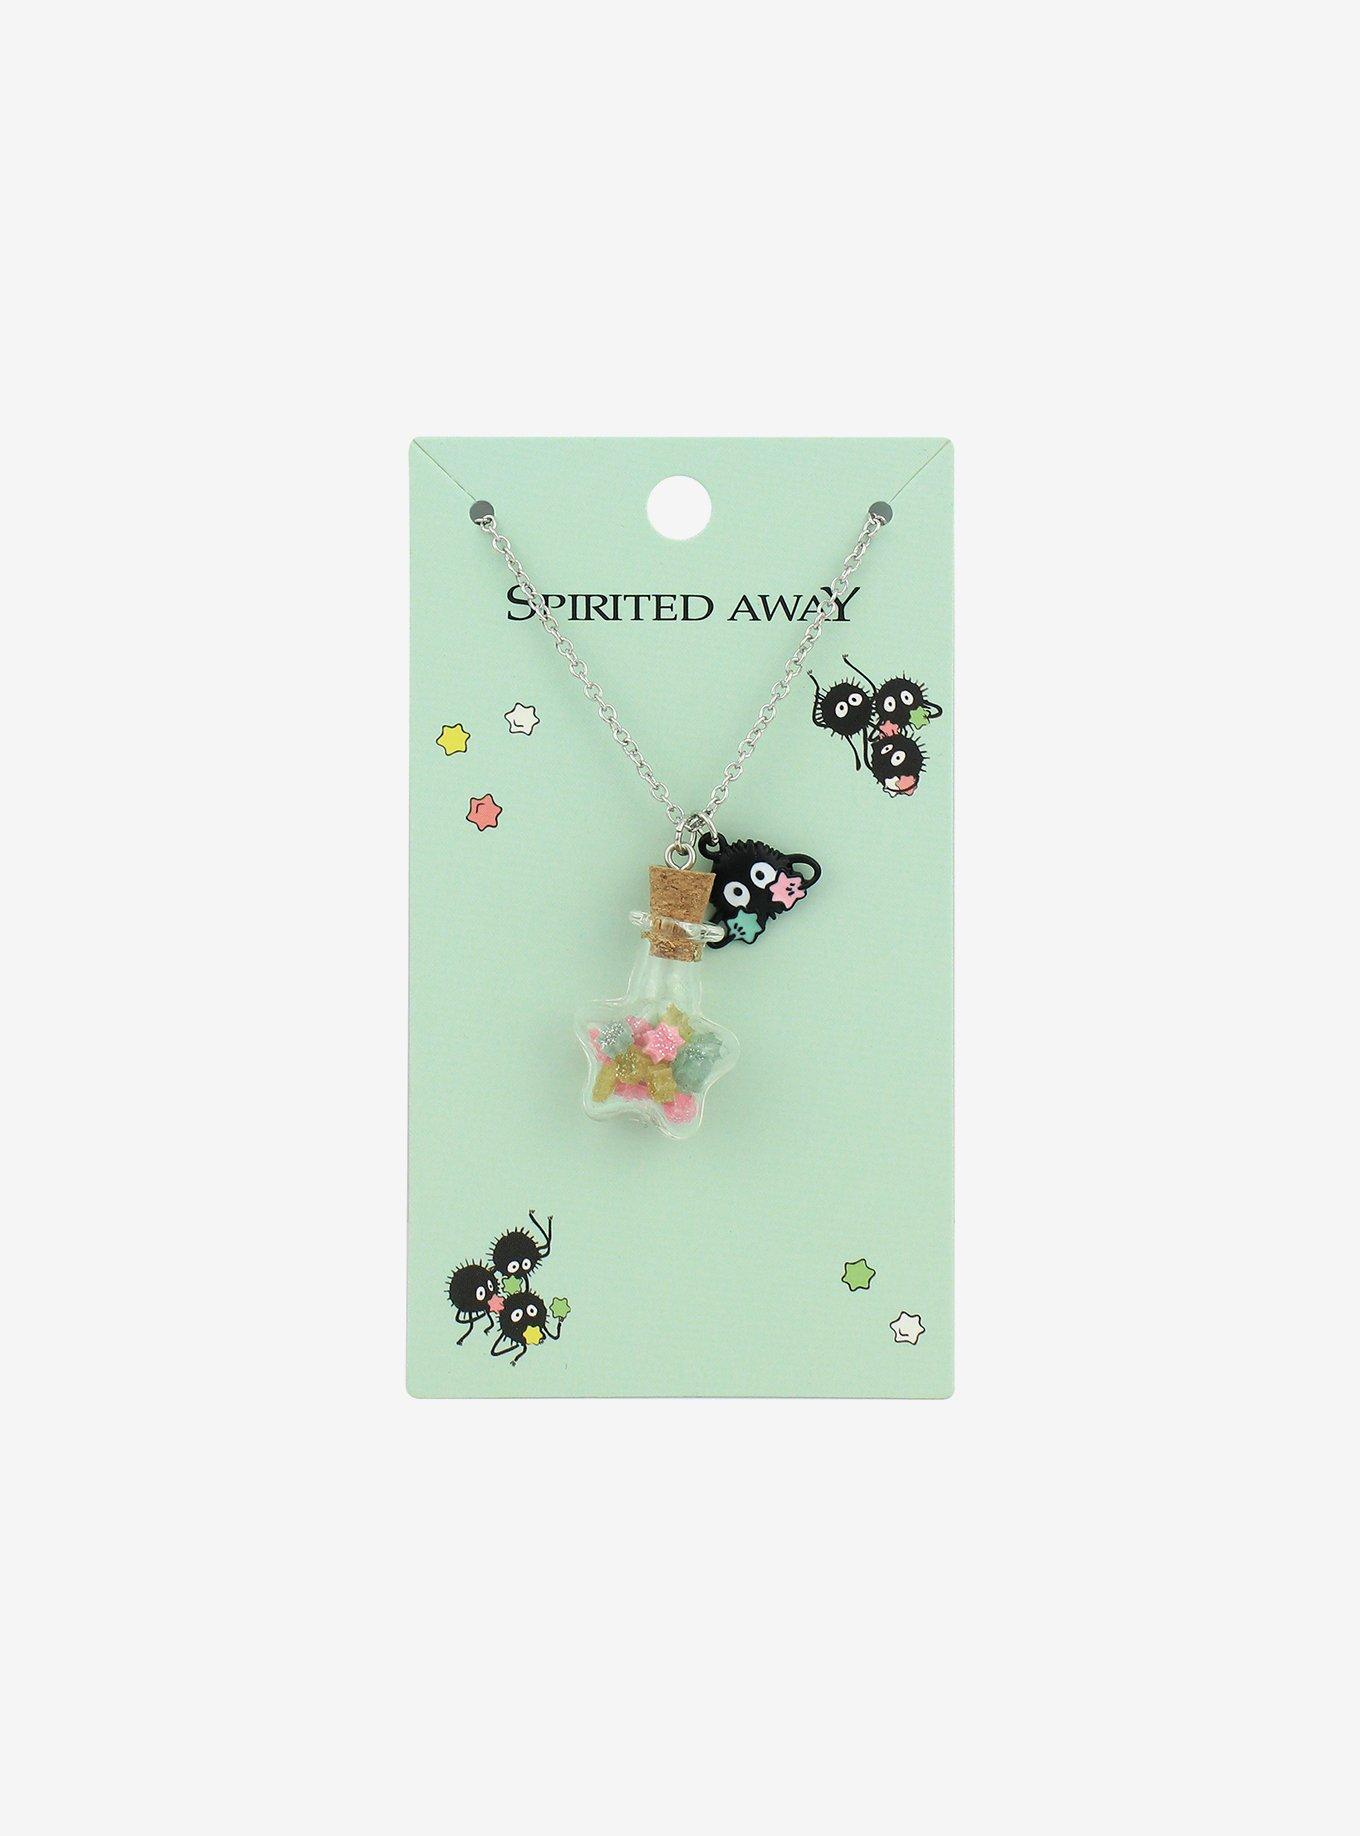 Studio Ghibli Spirited Away Soot Sprite Candy Bottle Pendant Necklace